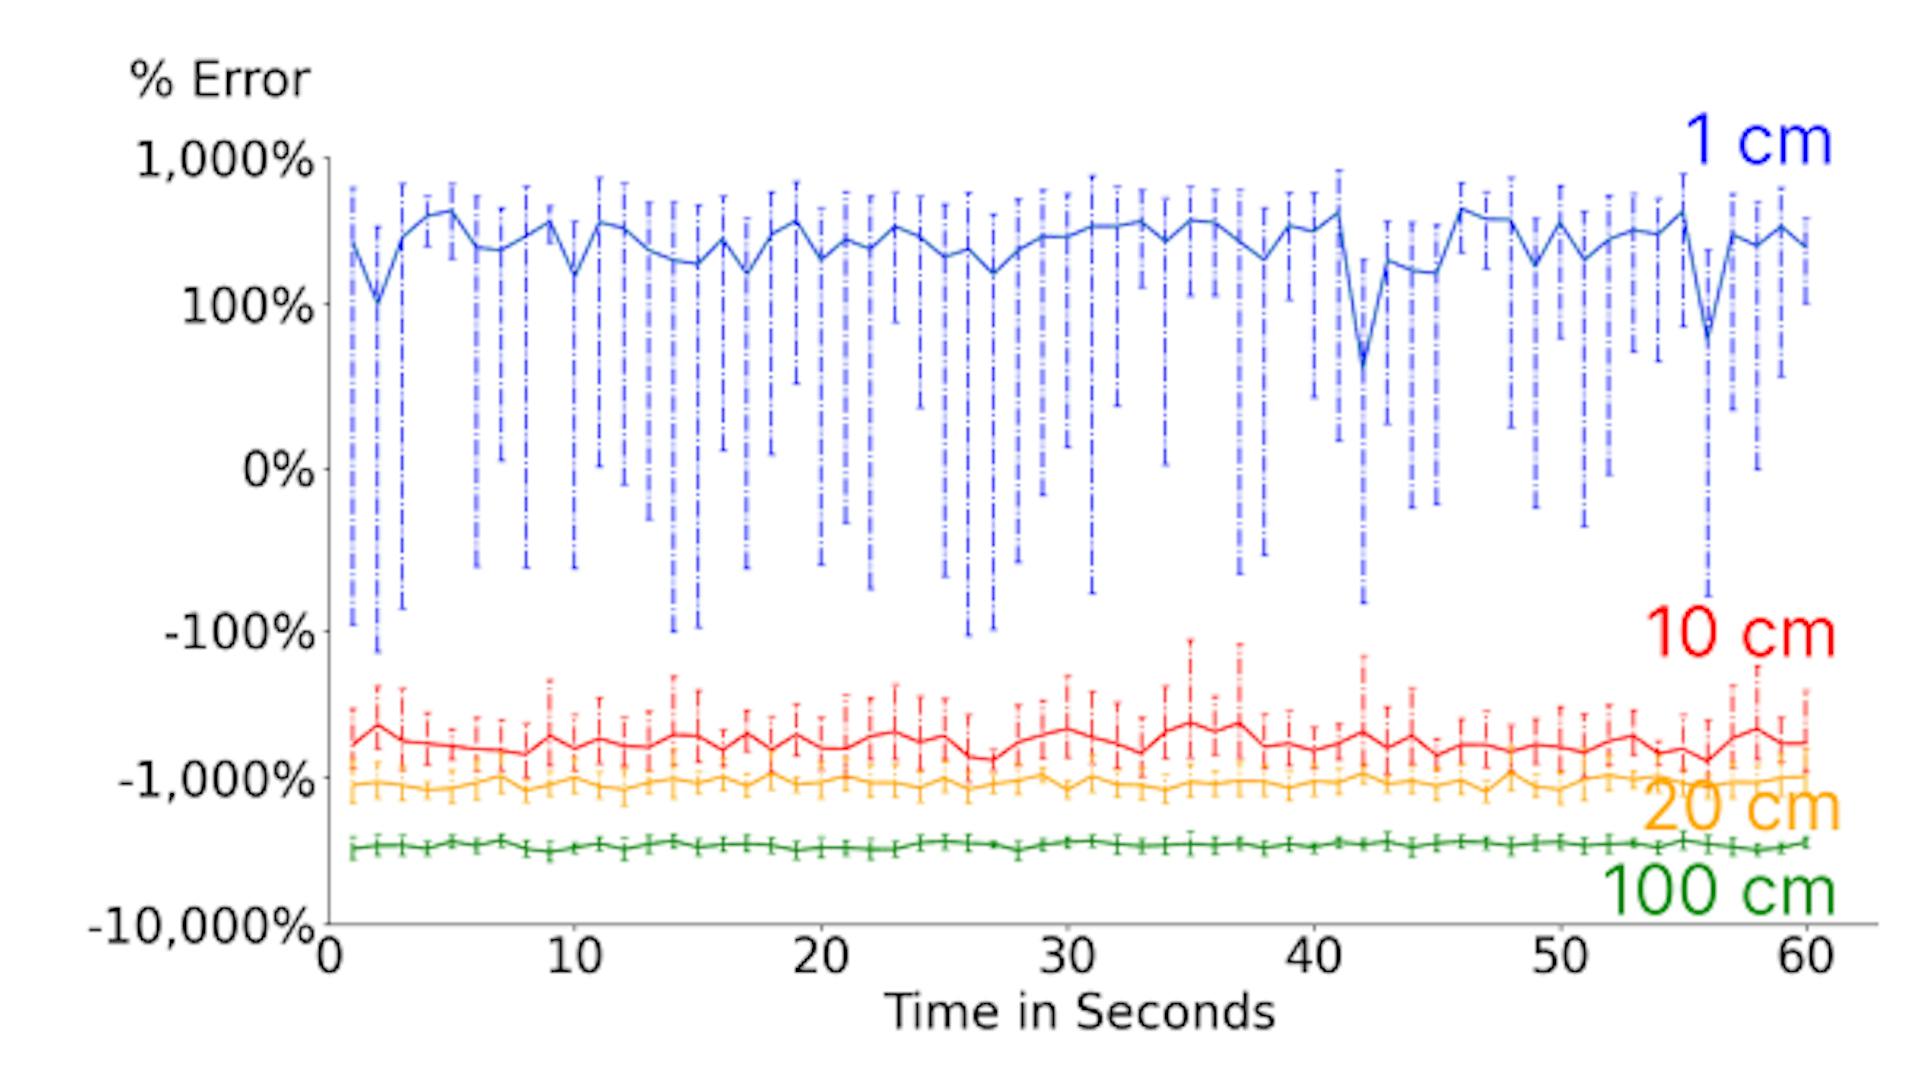 Figure 7: Percentage error (log scale) in measuring 1 cm distances per second for 60 seconds using two UWB DW1000 [20] cards calibrated at 1, 10, 20, and 100 cm.